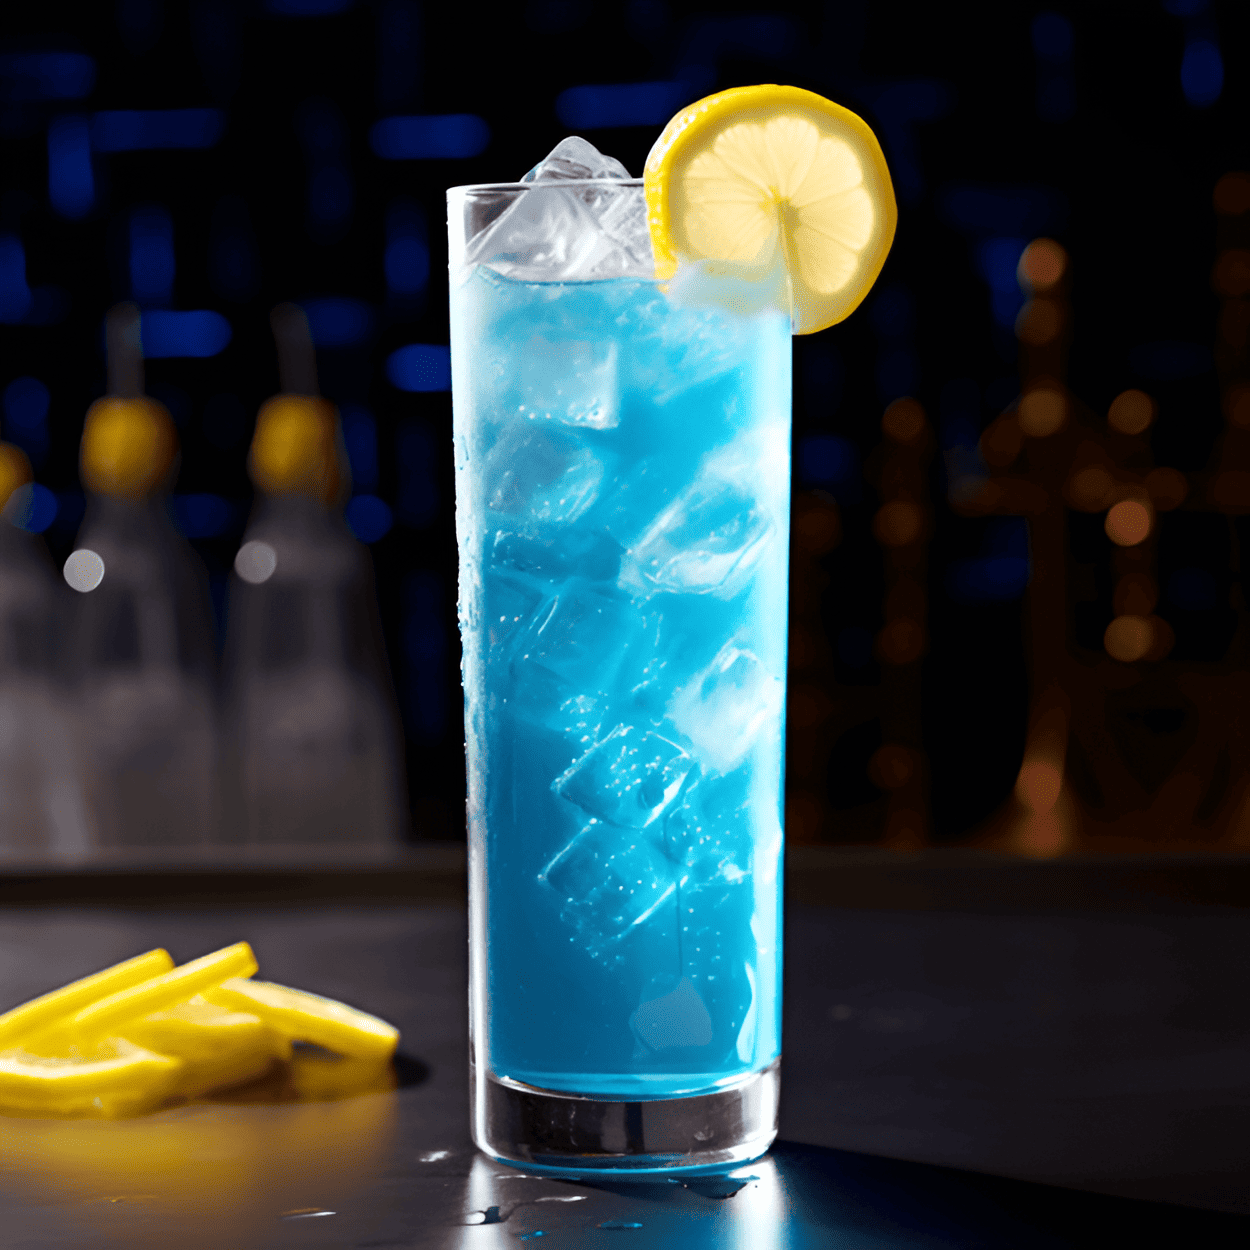 Titanic Cocktail Recipe - The Titanic cocktail is a robust and hearty drink. It has a strong, bold flavor with a hint of sweetness from the blue curacao. The whiskey gives it a warm, smoky undertone, while the lemon juice adds a refreshing tang.